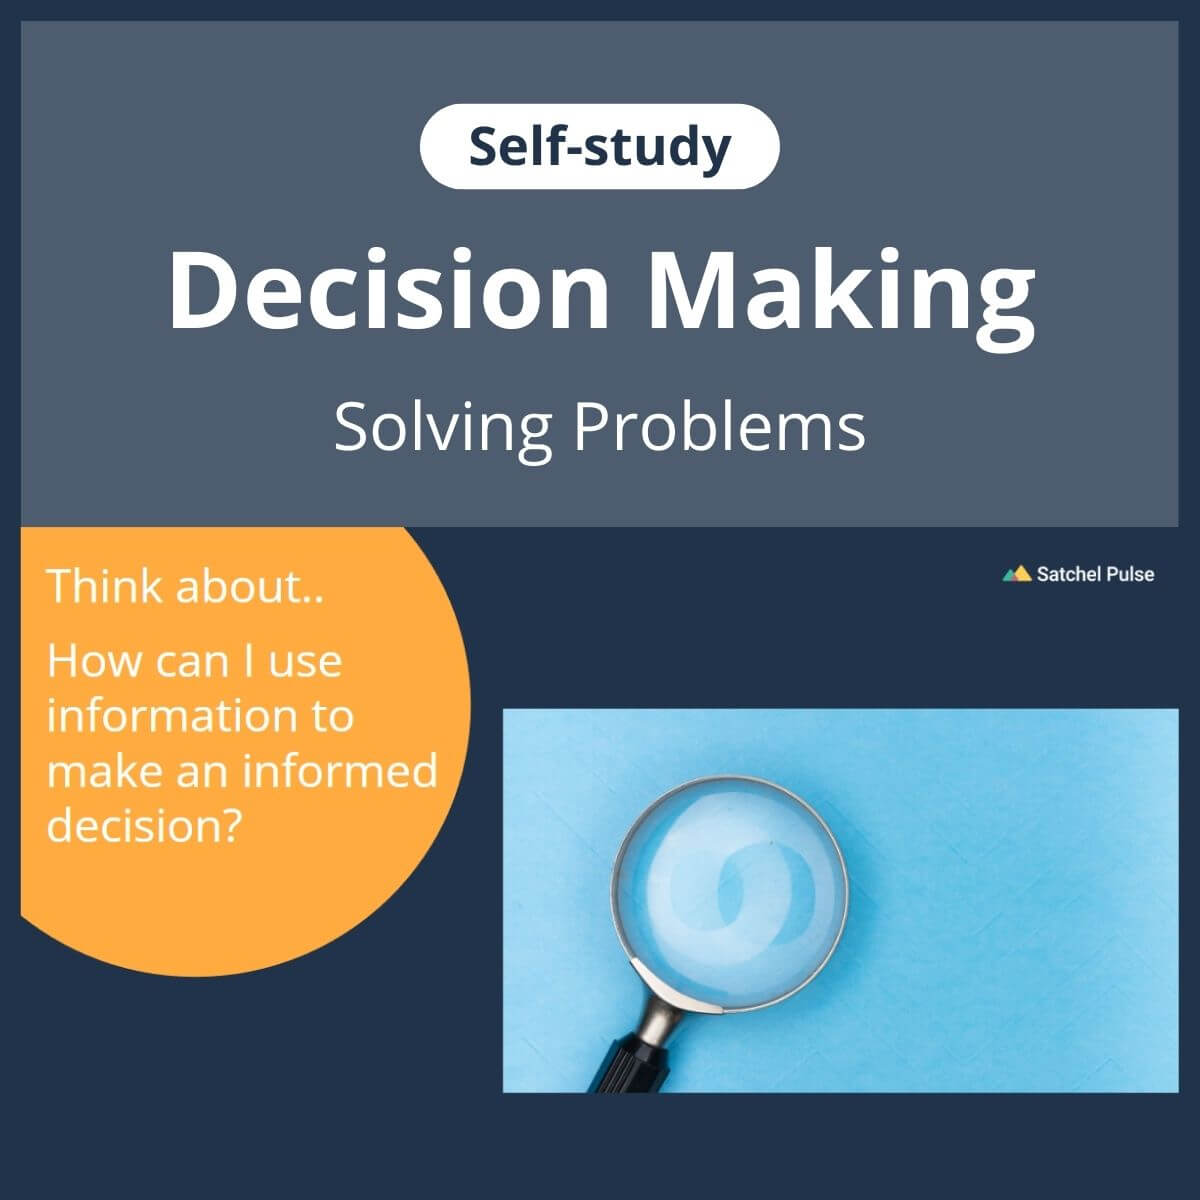 SEL self-study focusing on Solving Problems to use in your classroom as one of your SEL activities for Responsible Decision-Making